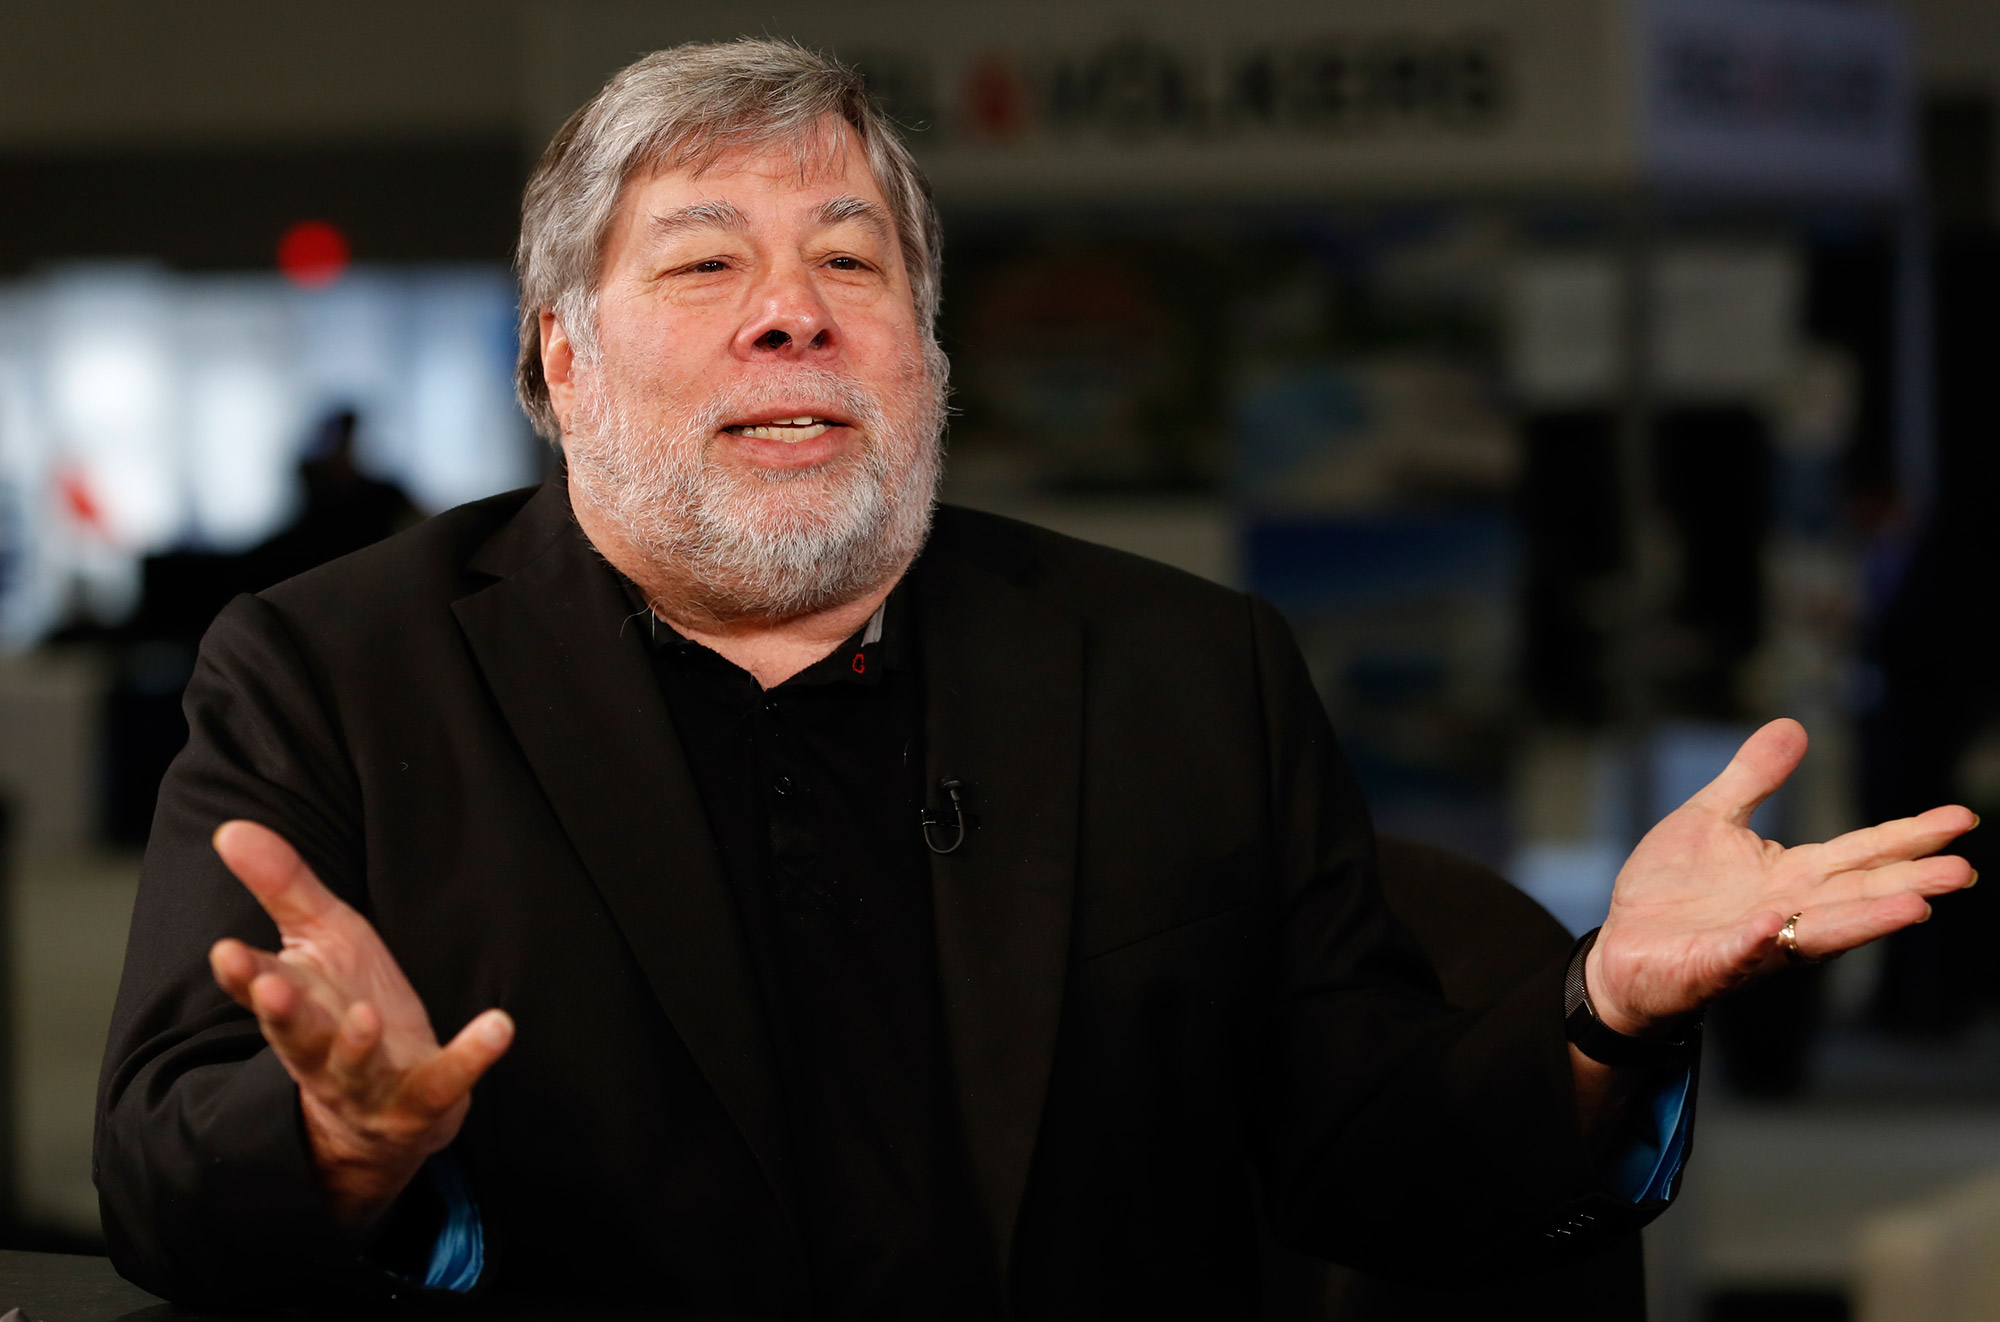 Woz joins the #deleteFacebook campaign and compares Apple favorably to Mark Zuckerberg's company